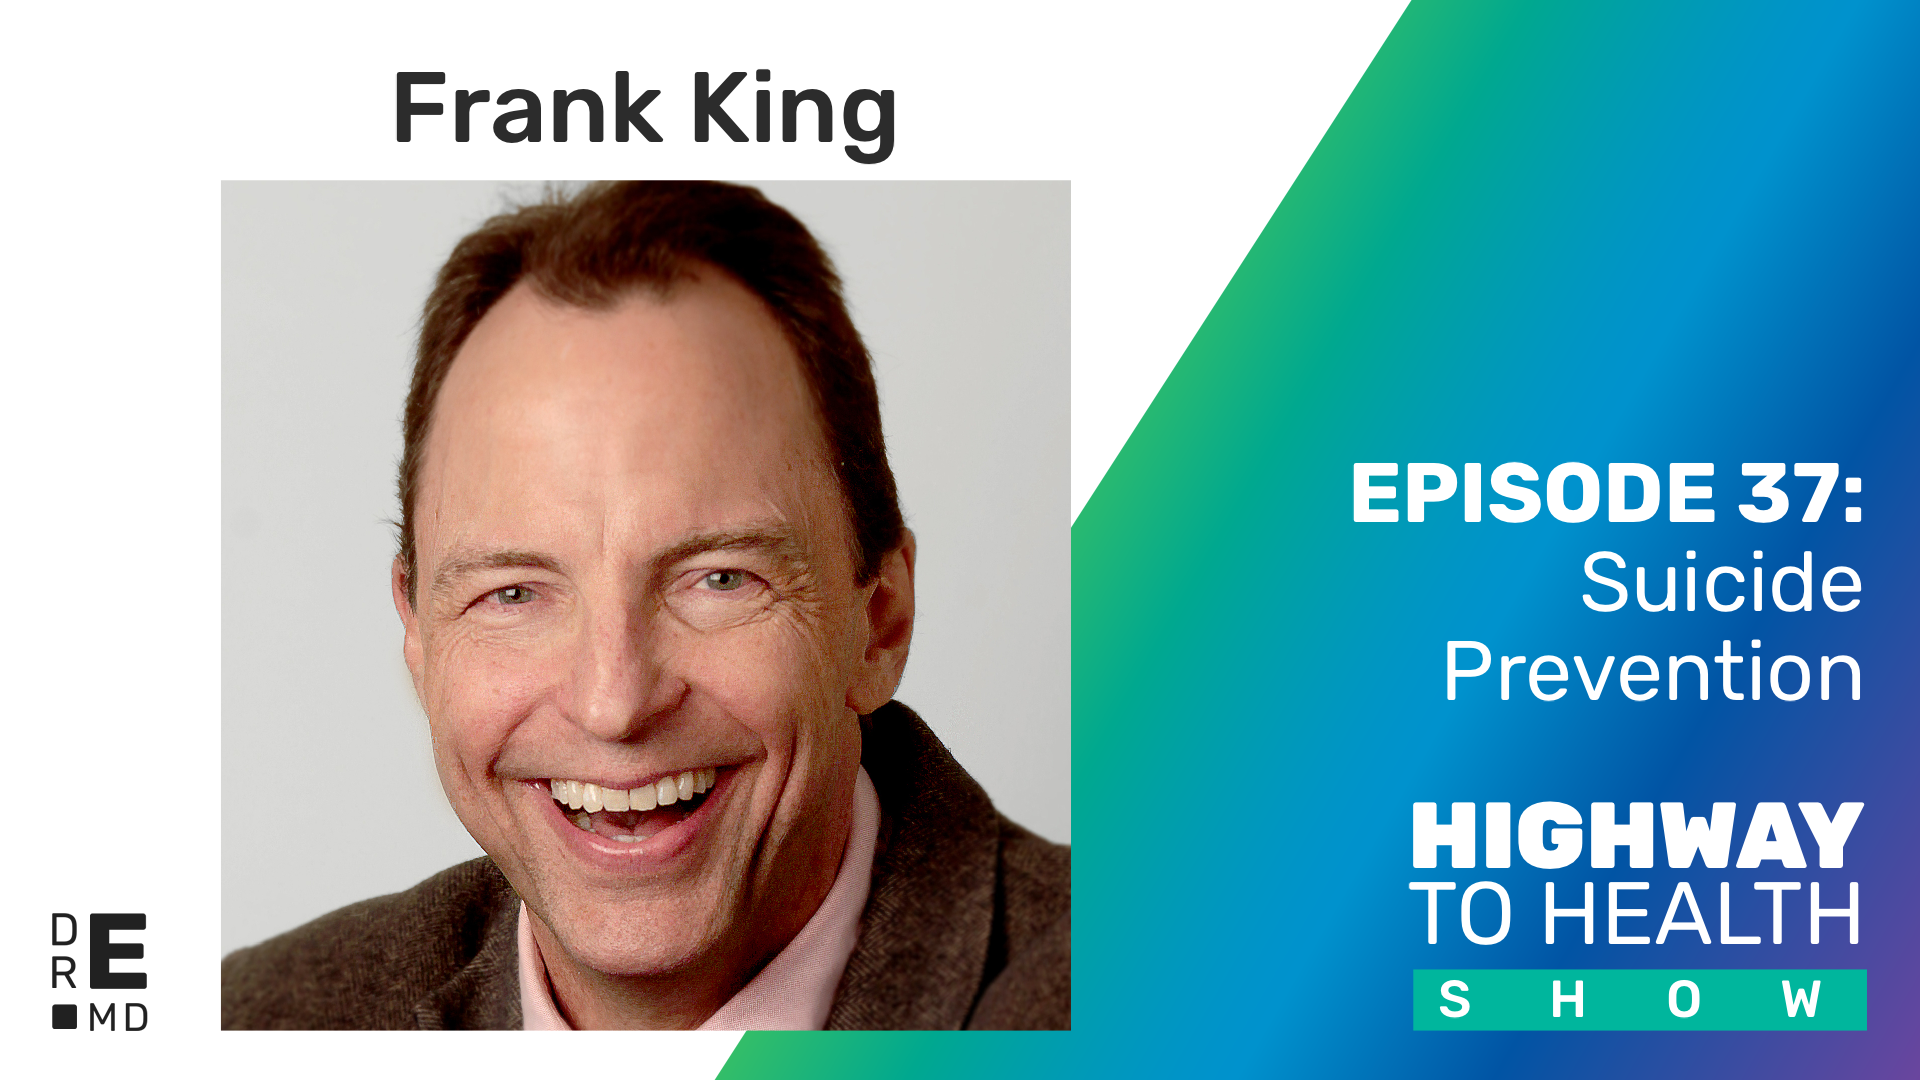 Highway to Health: Ep 37 - Frank King